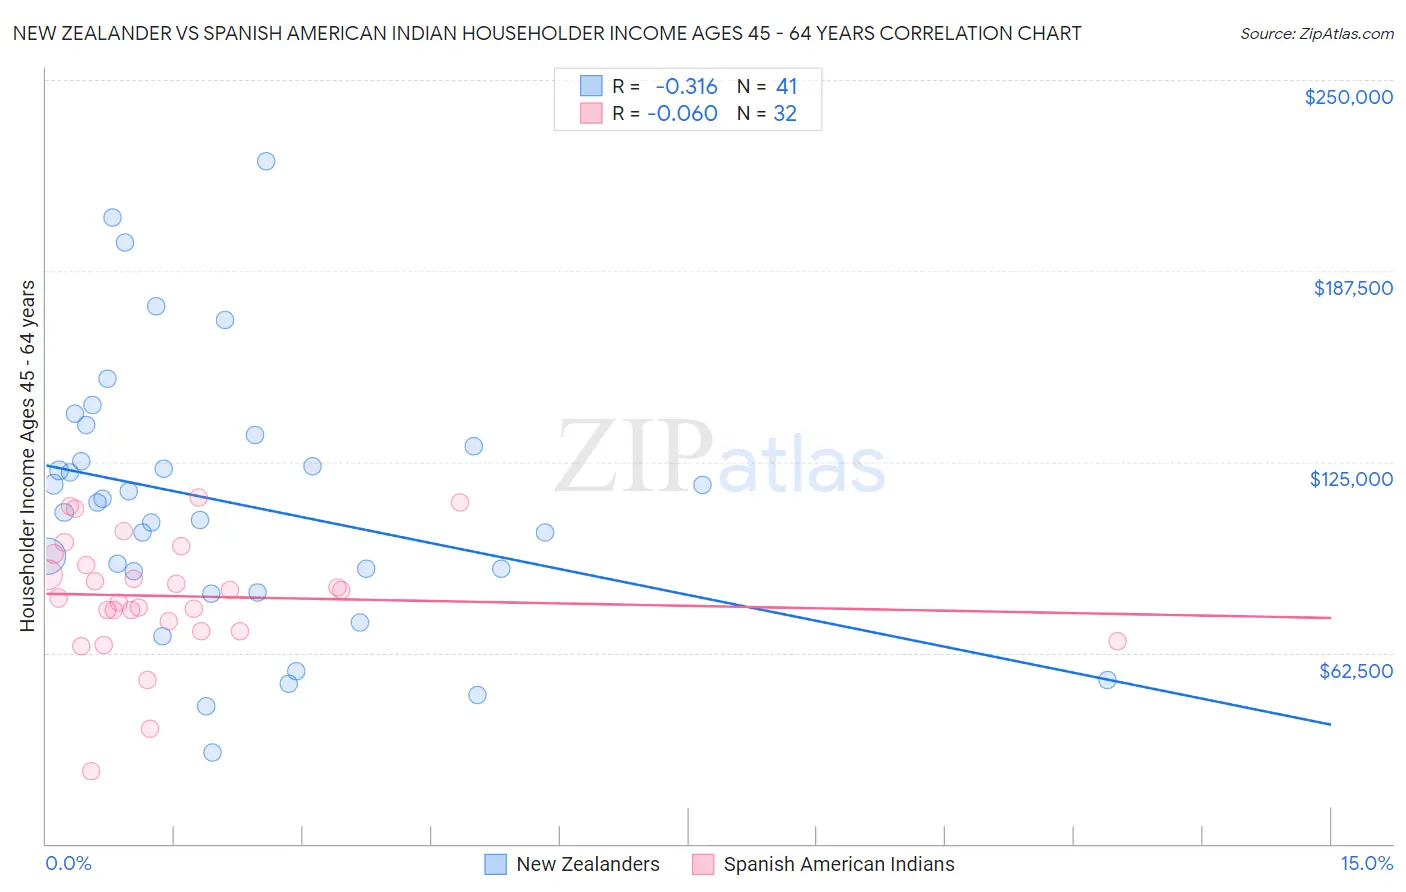 New Zealander vs Spanish American Indian Householder Income Ages 45 - 64 years